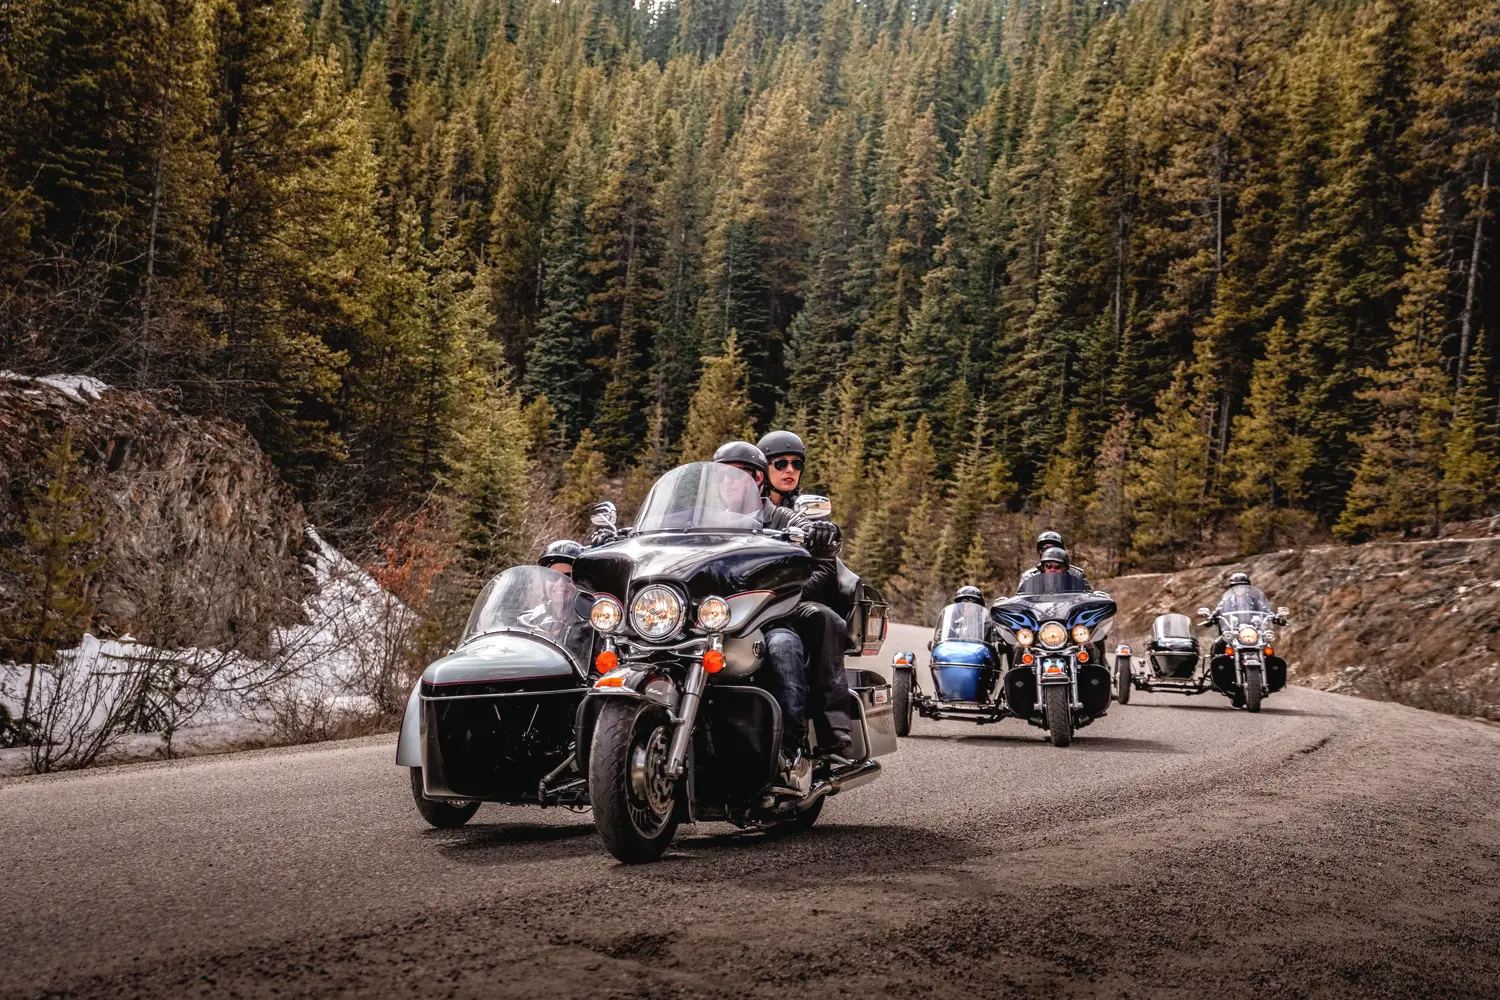 Motorcycle tour in Jasper, Canada